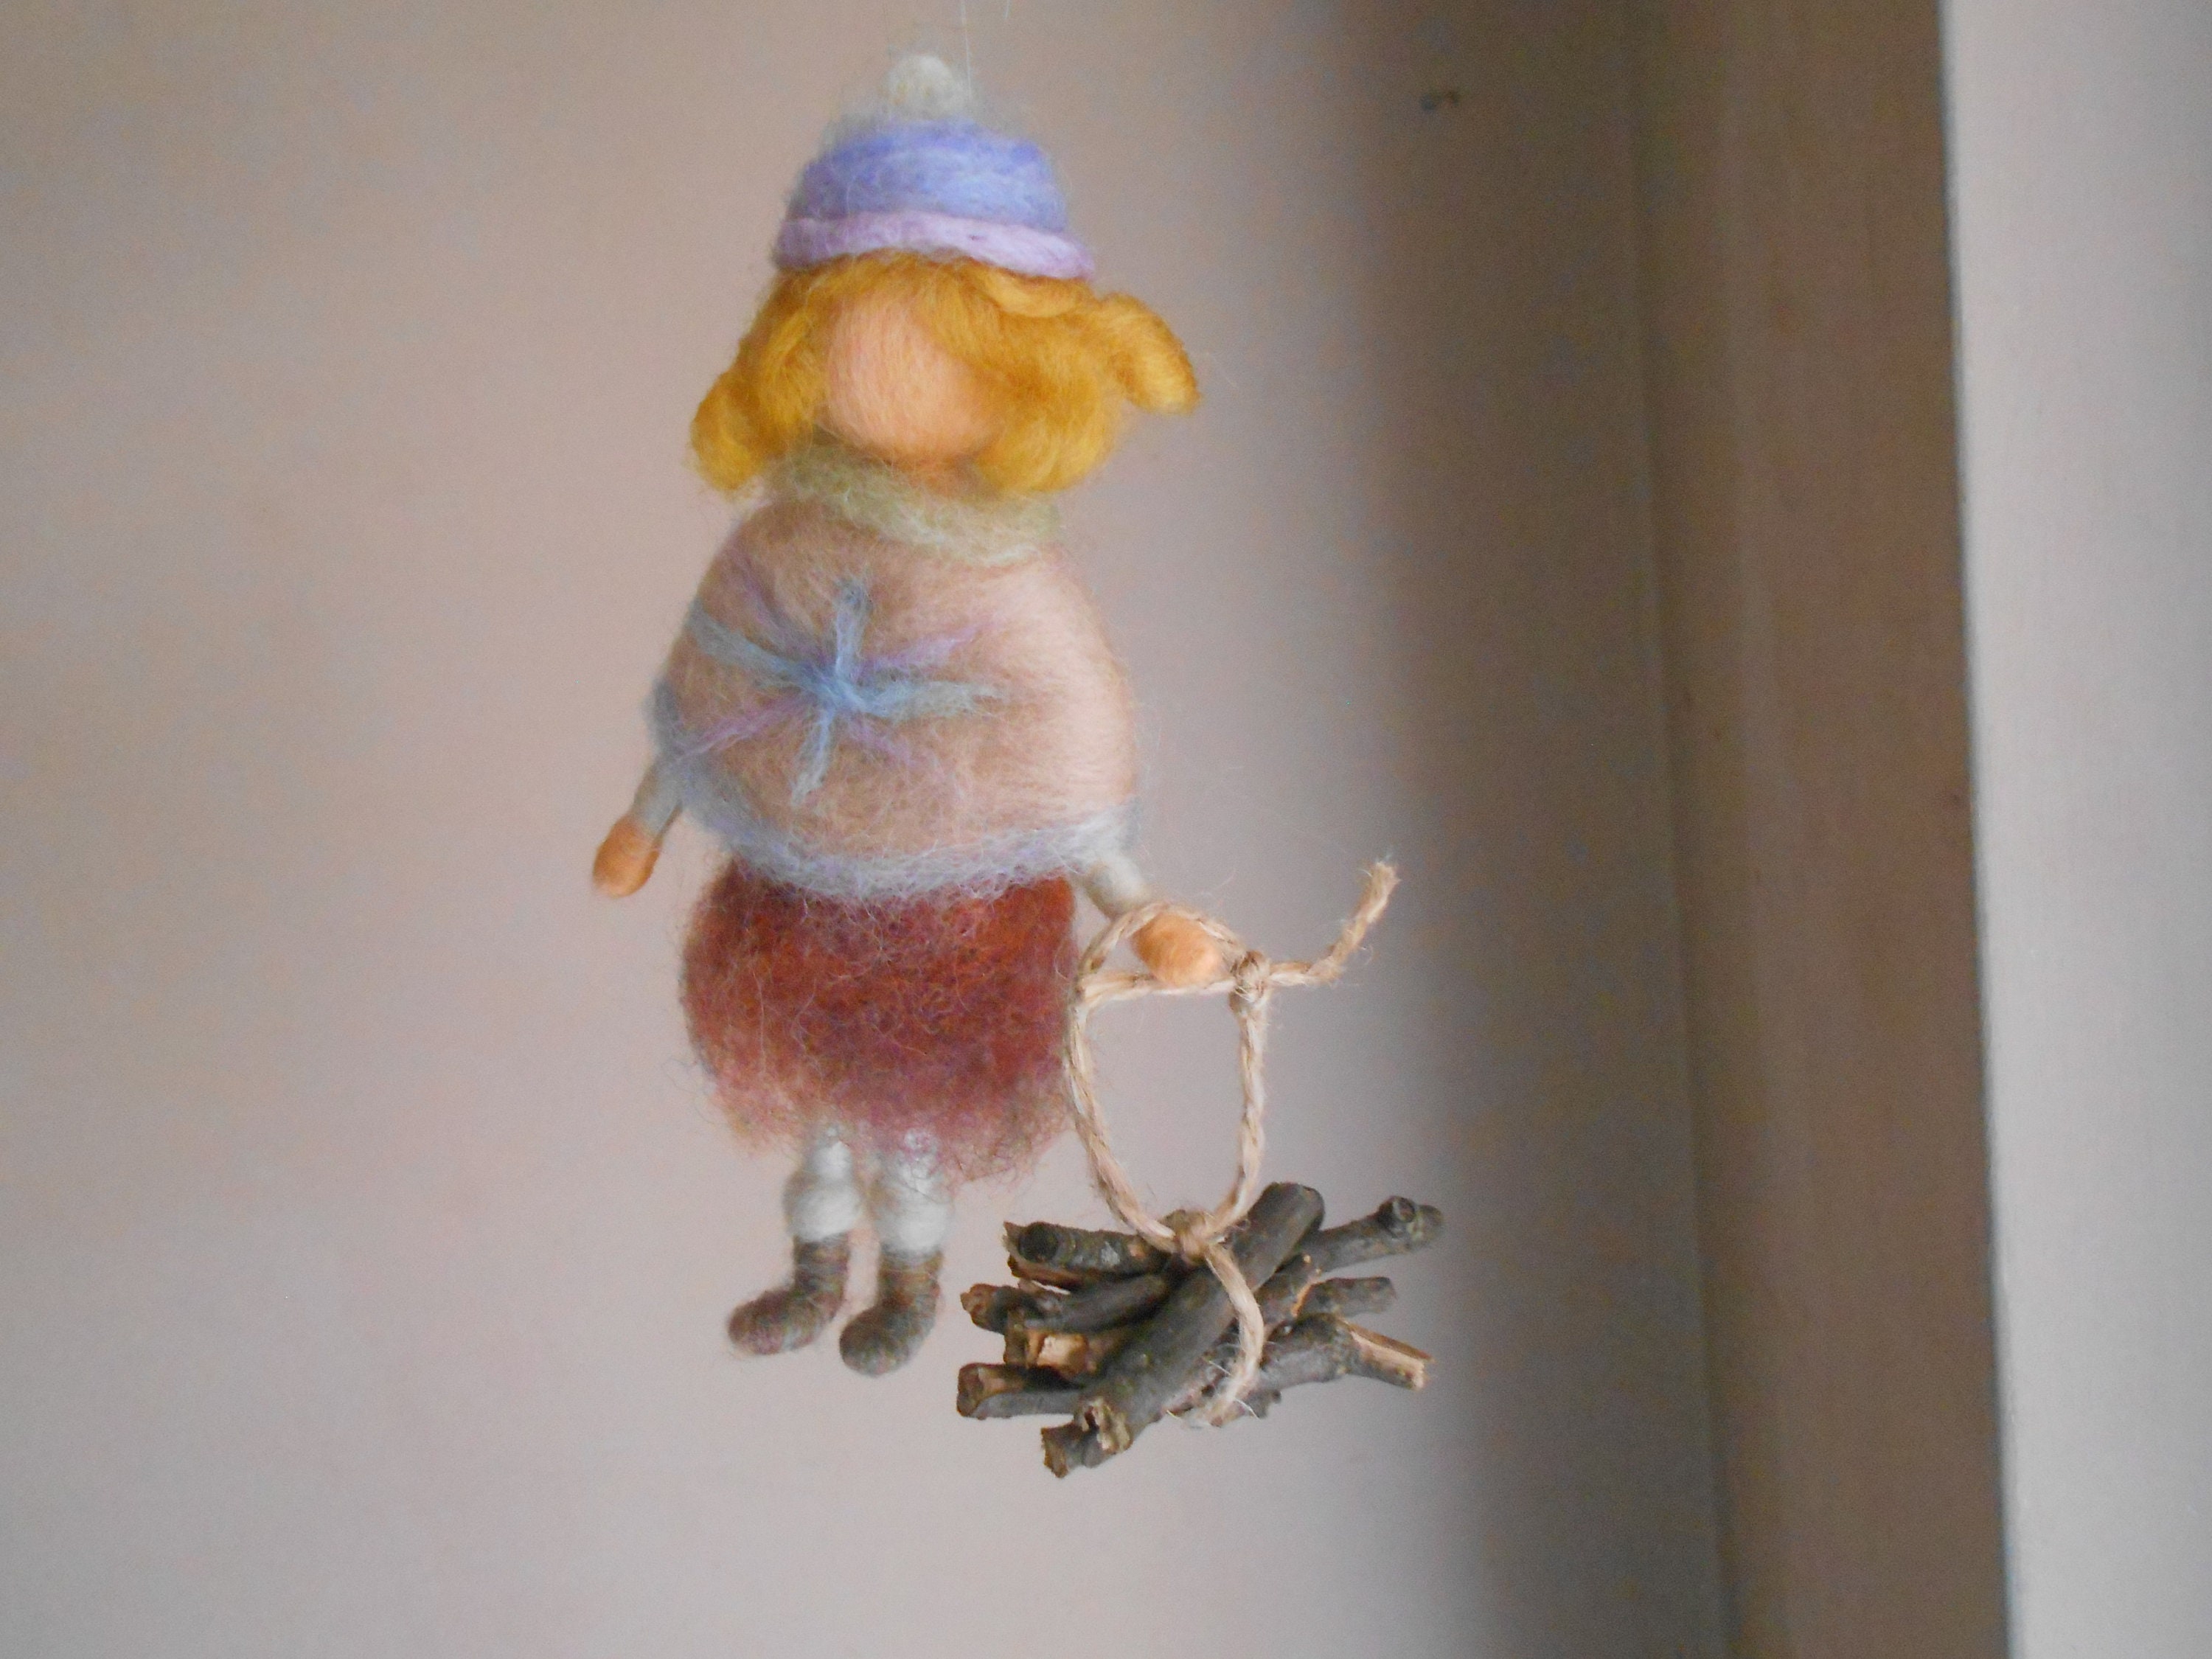 An Introduction to the World of Needle Felting. - Sweet Pea Dolls